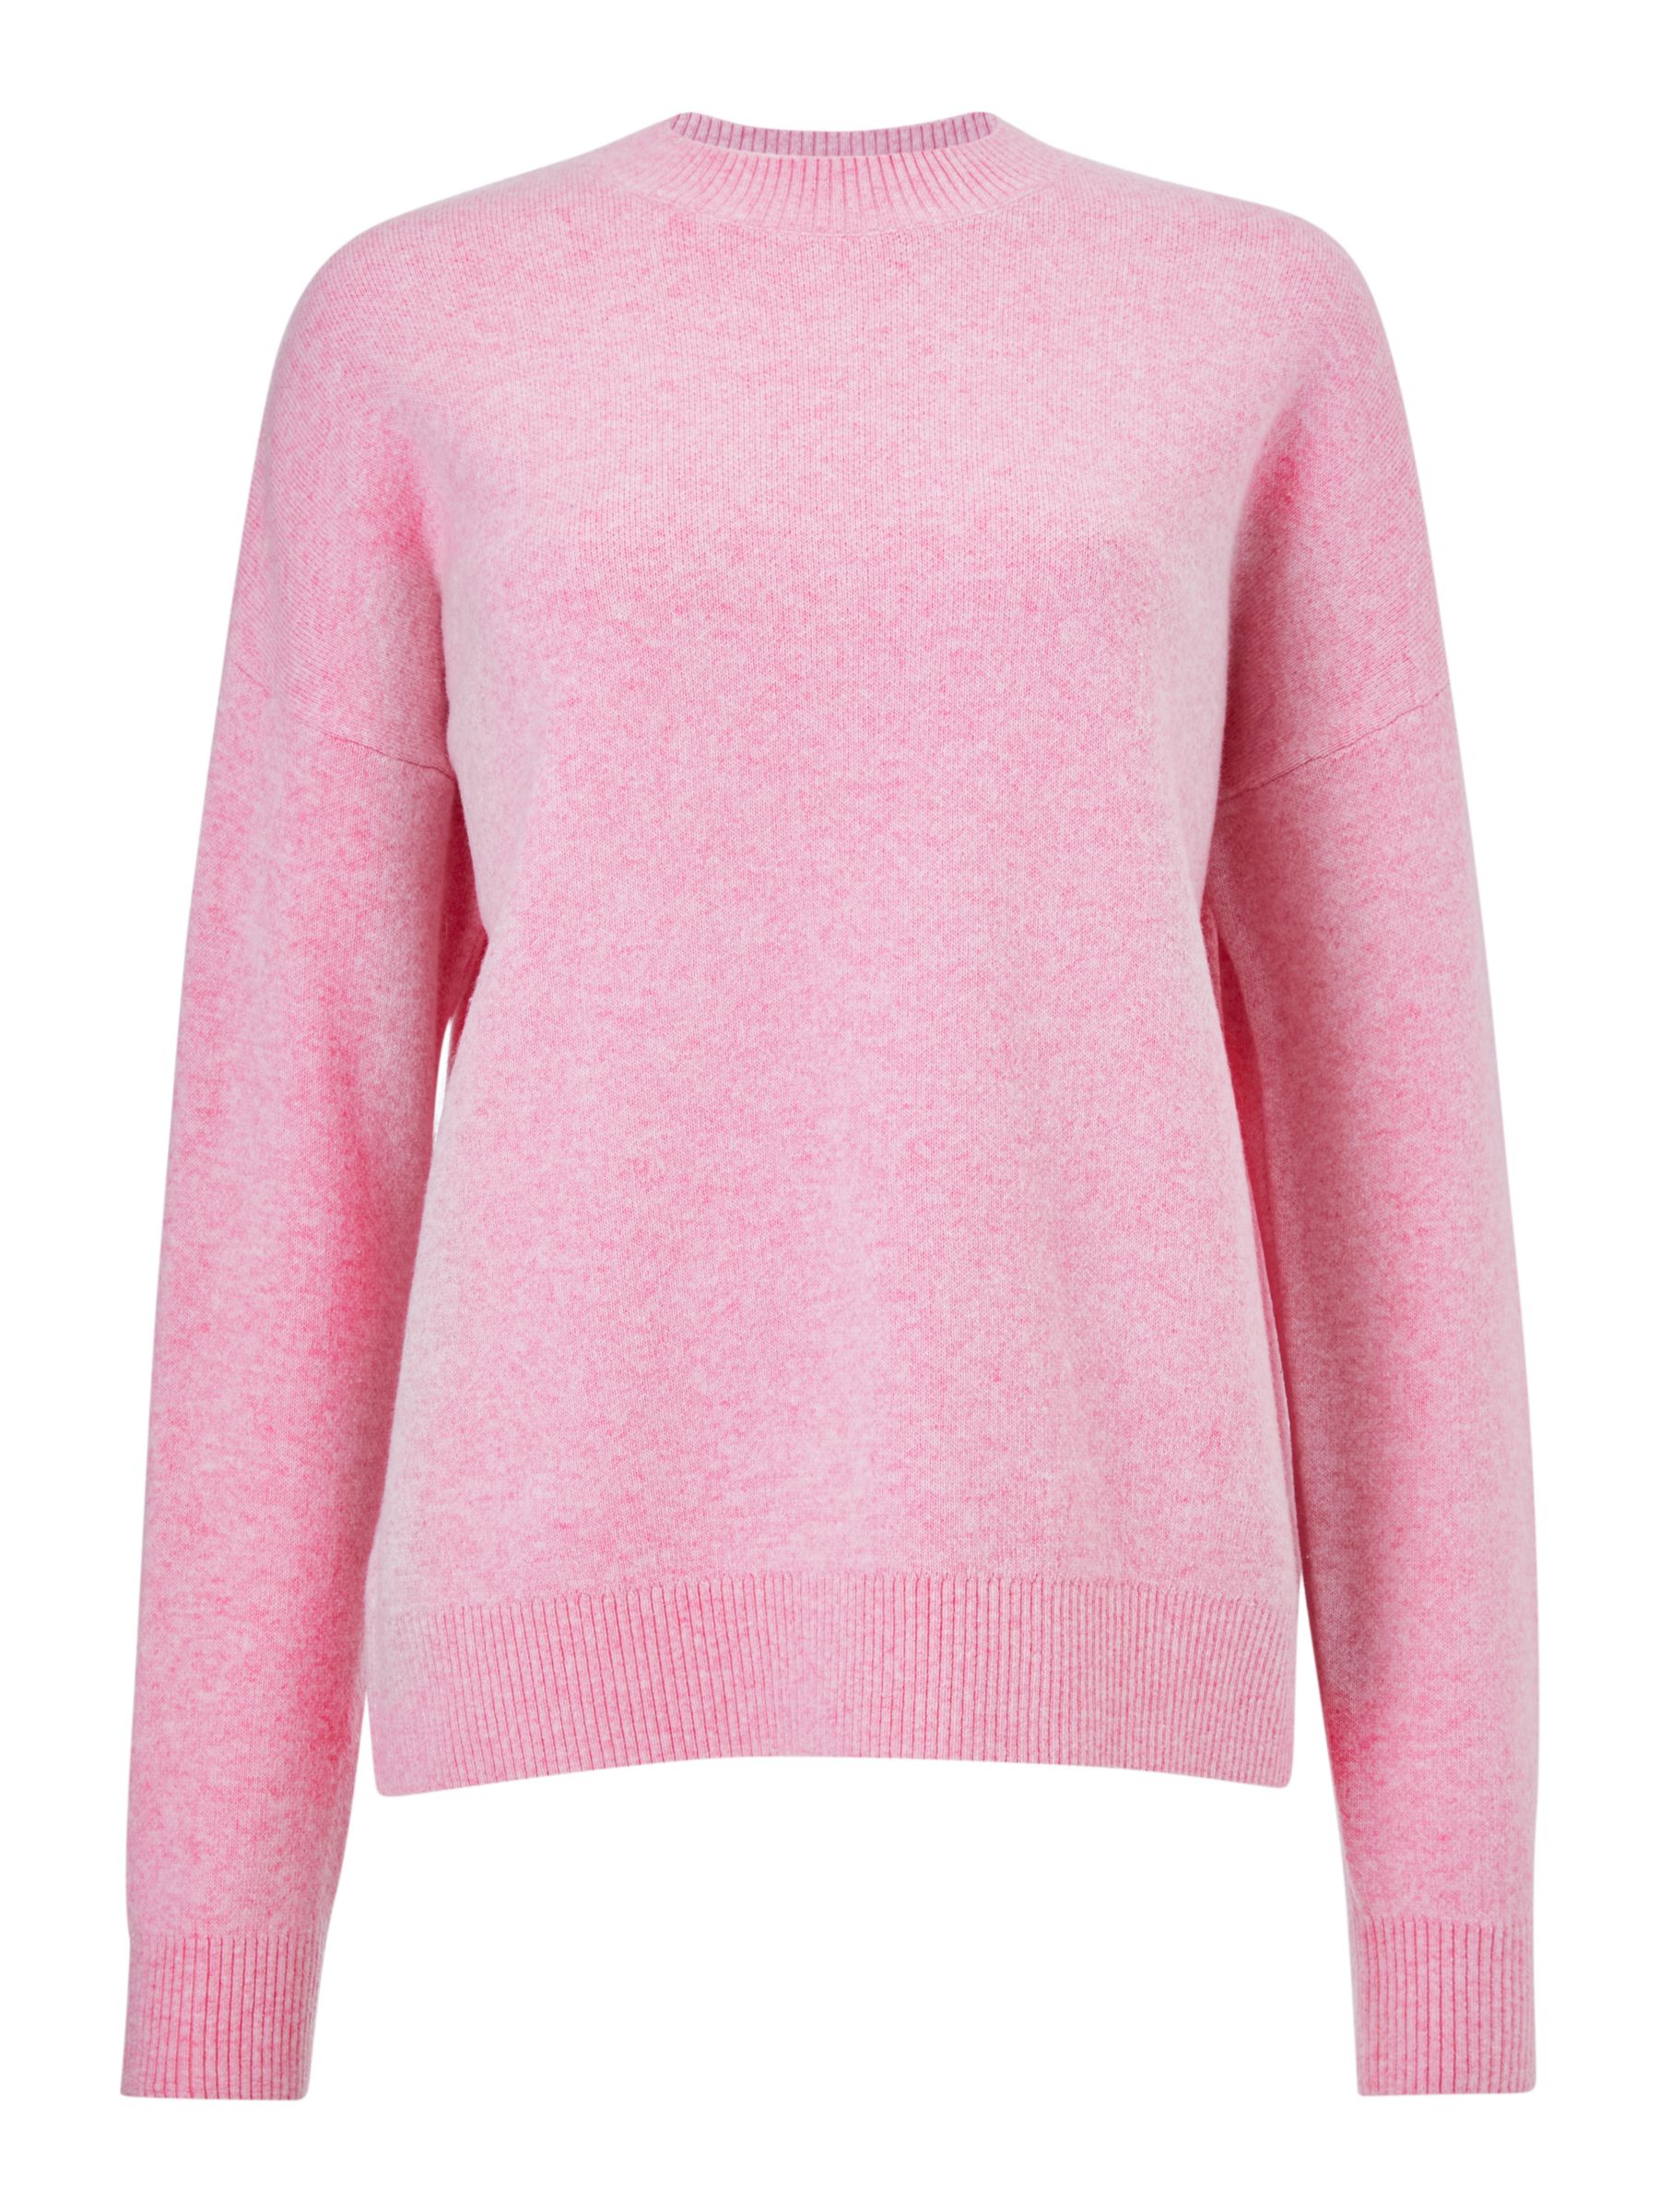 Collection WEEKEND by John Lewis Crew Neck Boxy Sweater, Soft Pink Marl ...